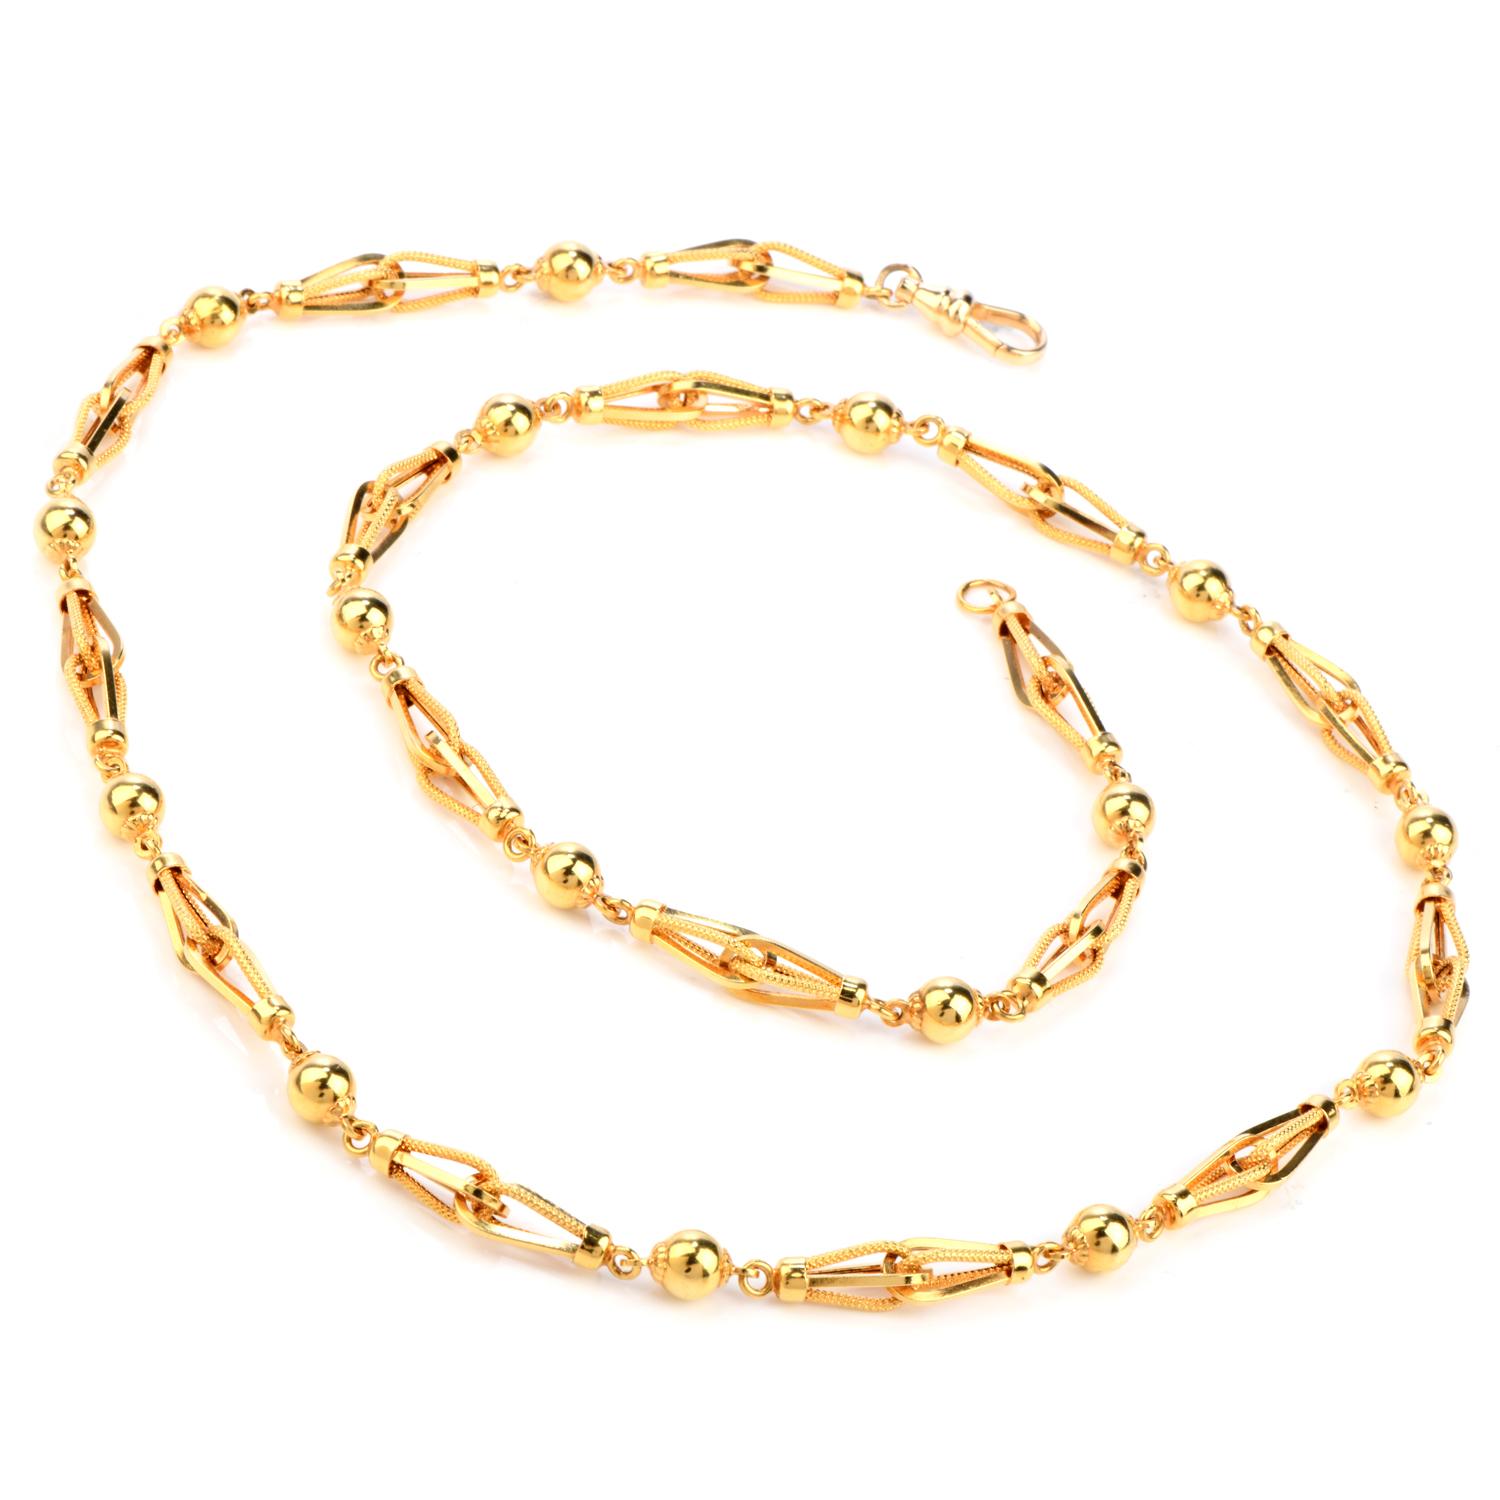 This fun loving Vintage retro 1950's long Gold Chain Necklace was inspired in an Geometric Sphere motif 

crafted in 18K gold. Draping down the neckline is 28 inches of gold links.

Measuring 6mm x 28 Inches.

Weighing appx. 40.1 Grams.

Excellent